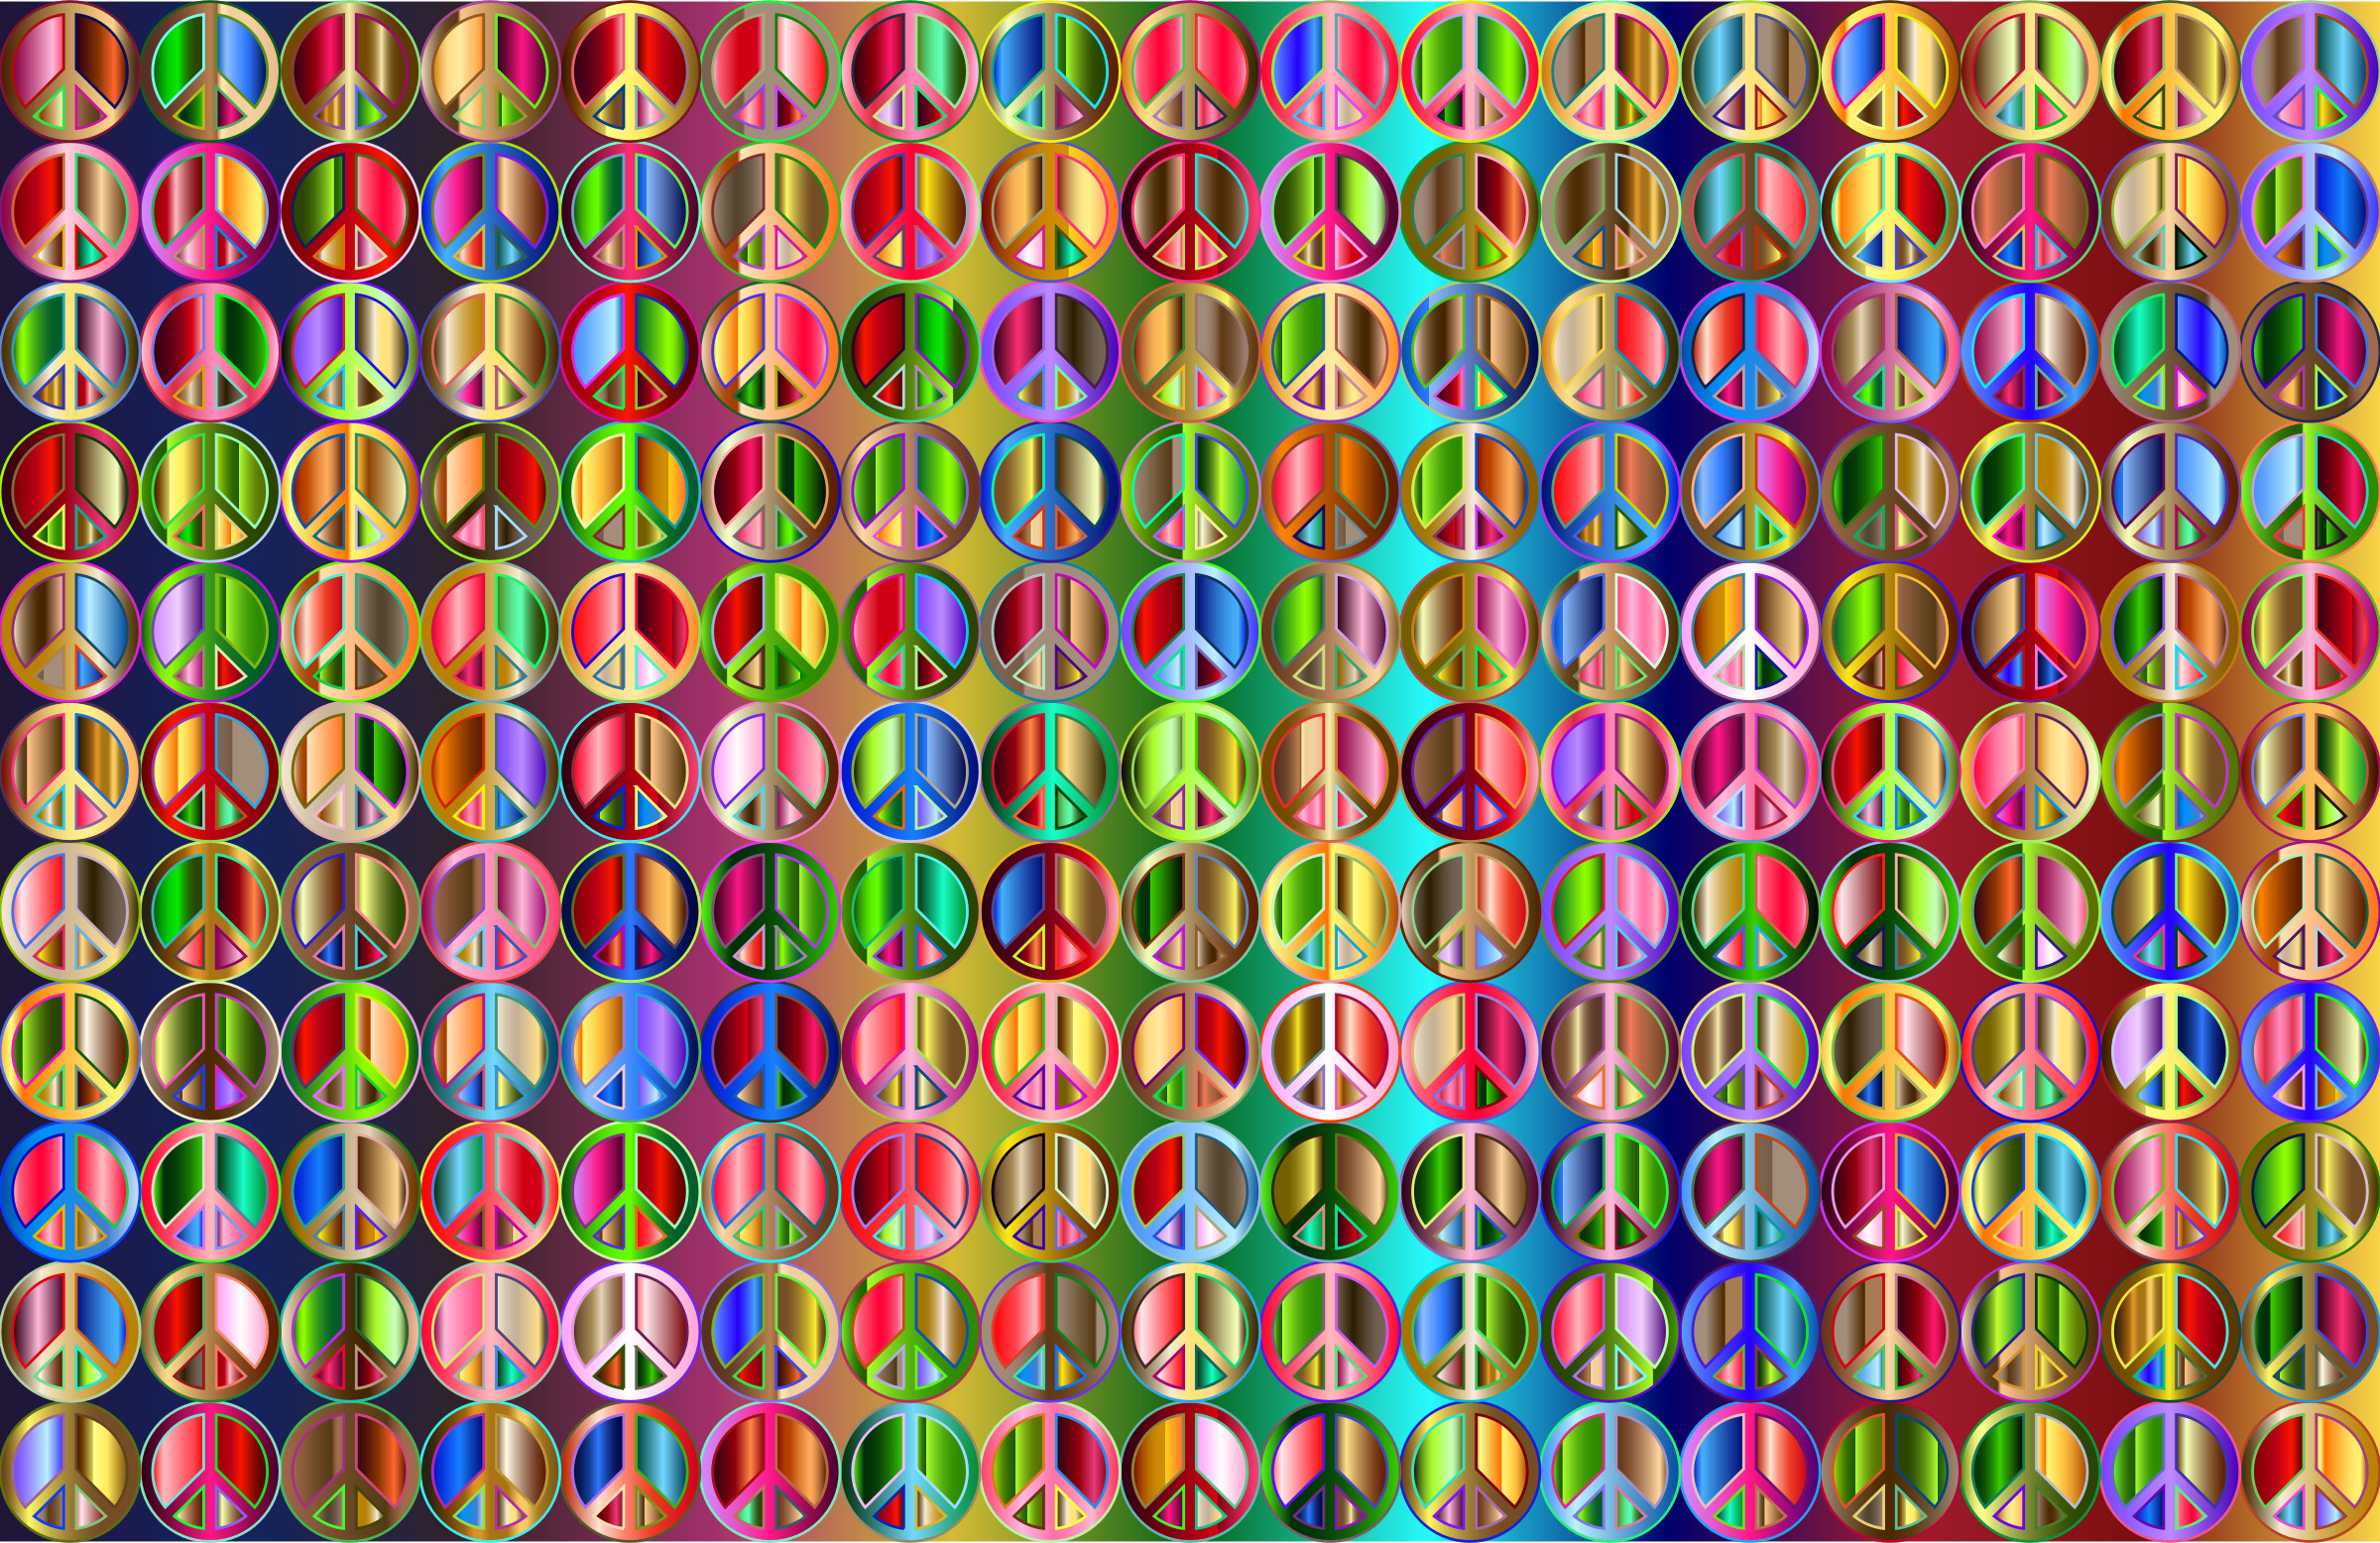 2400x1556 Prismatic Peace Sign Background 5 Variation 4